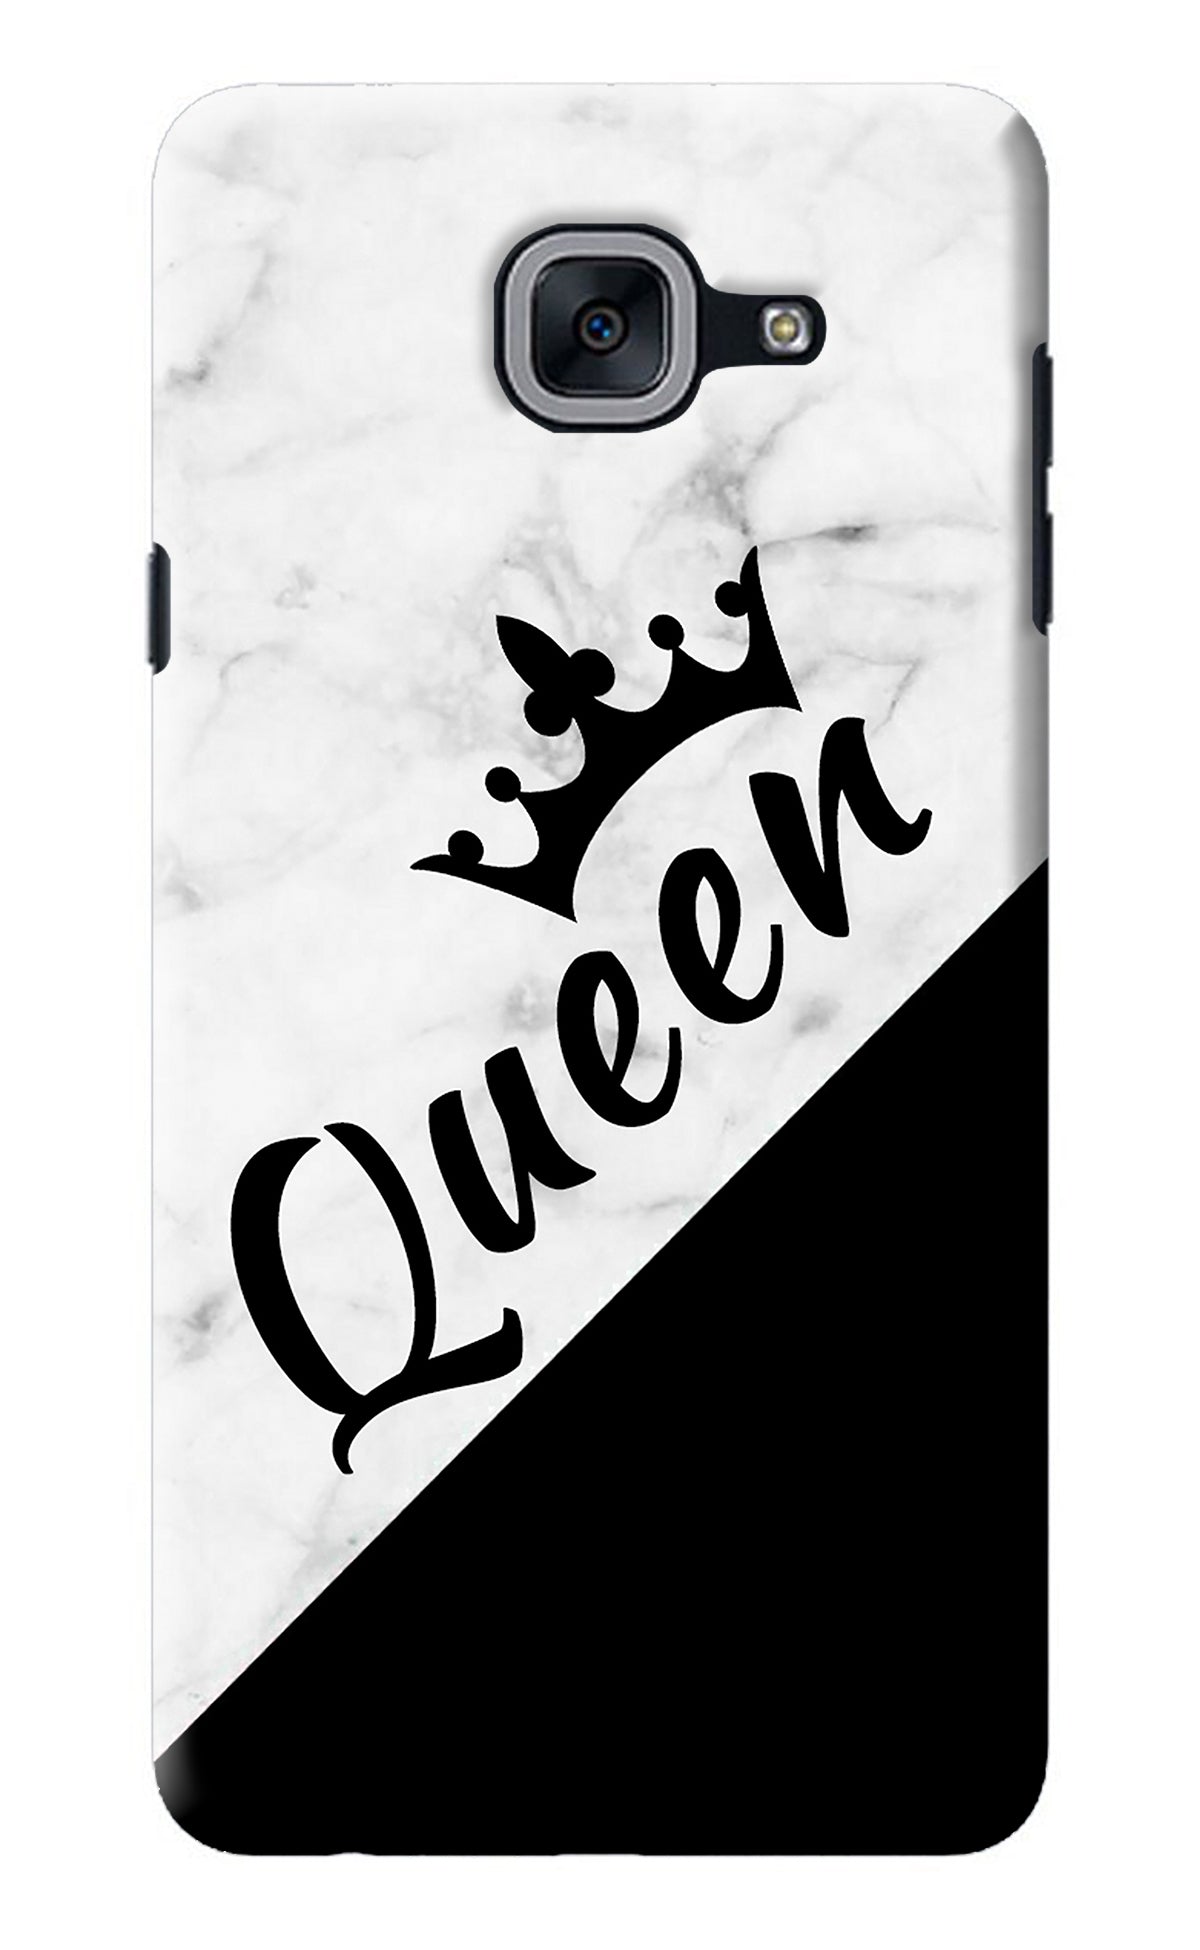 Queen Samsung J7 Max Back Cover